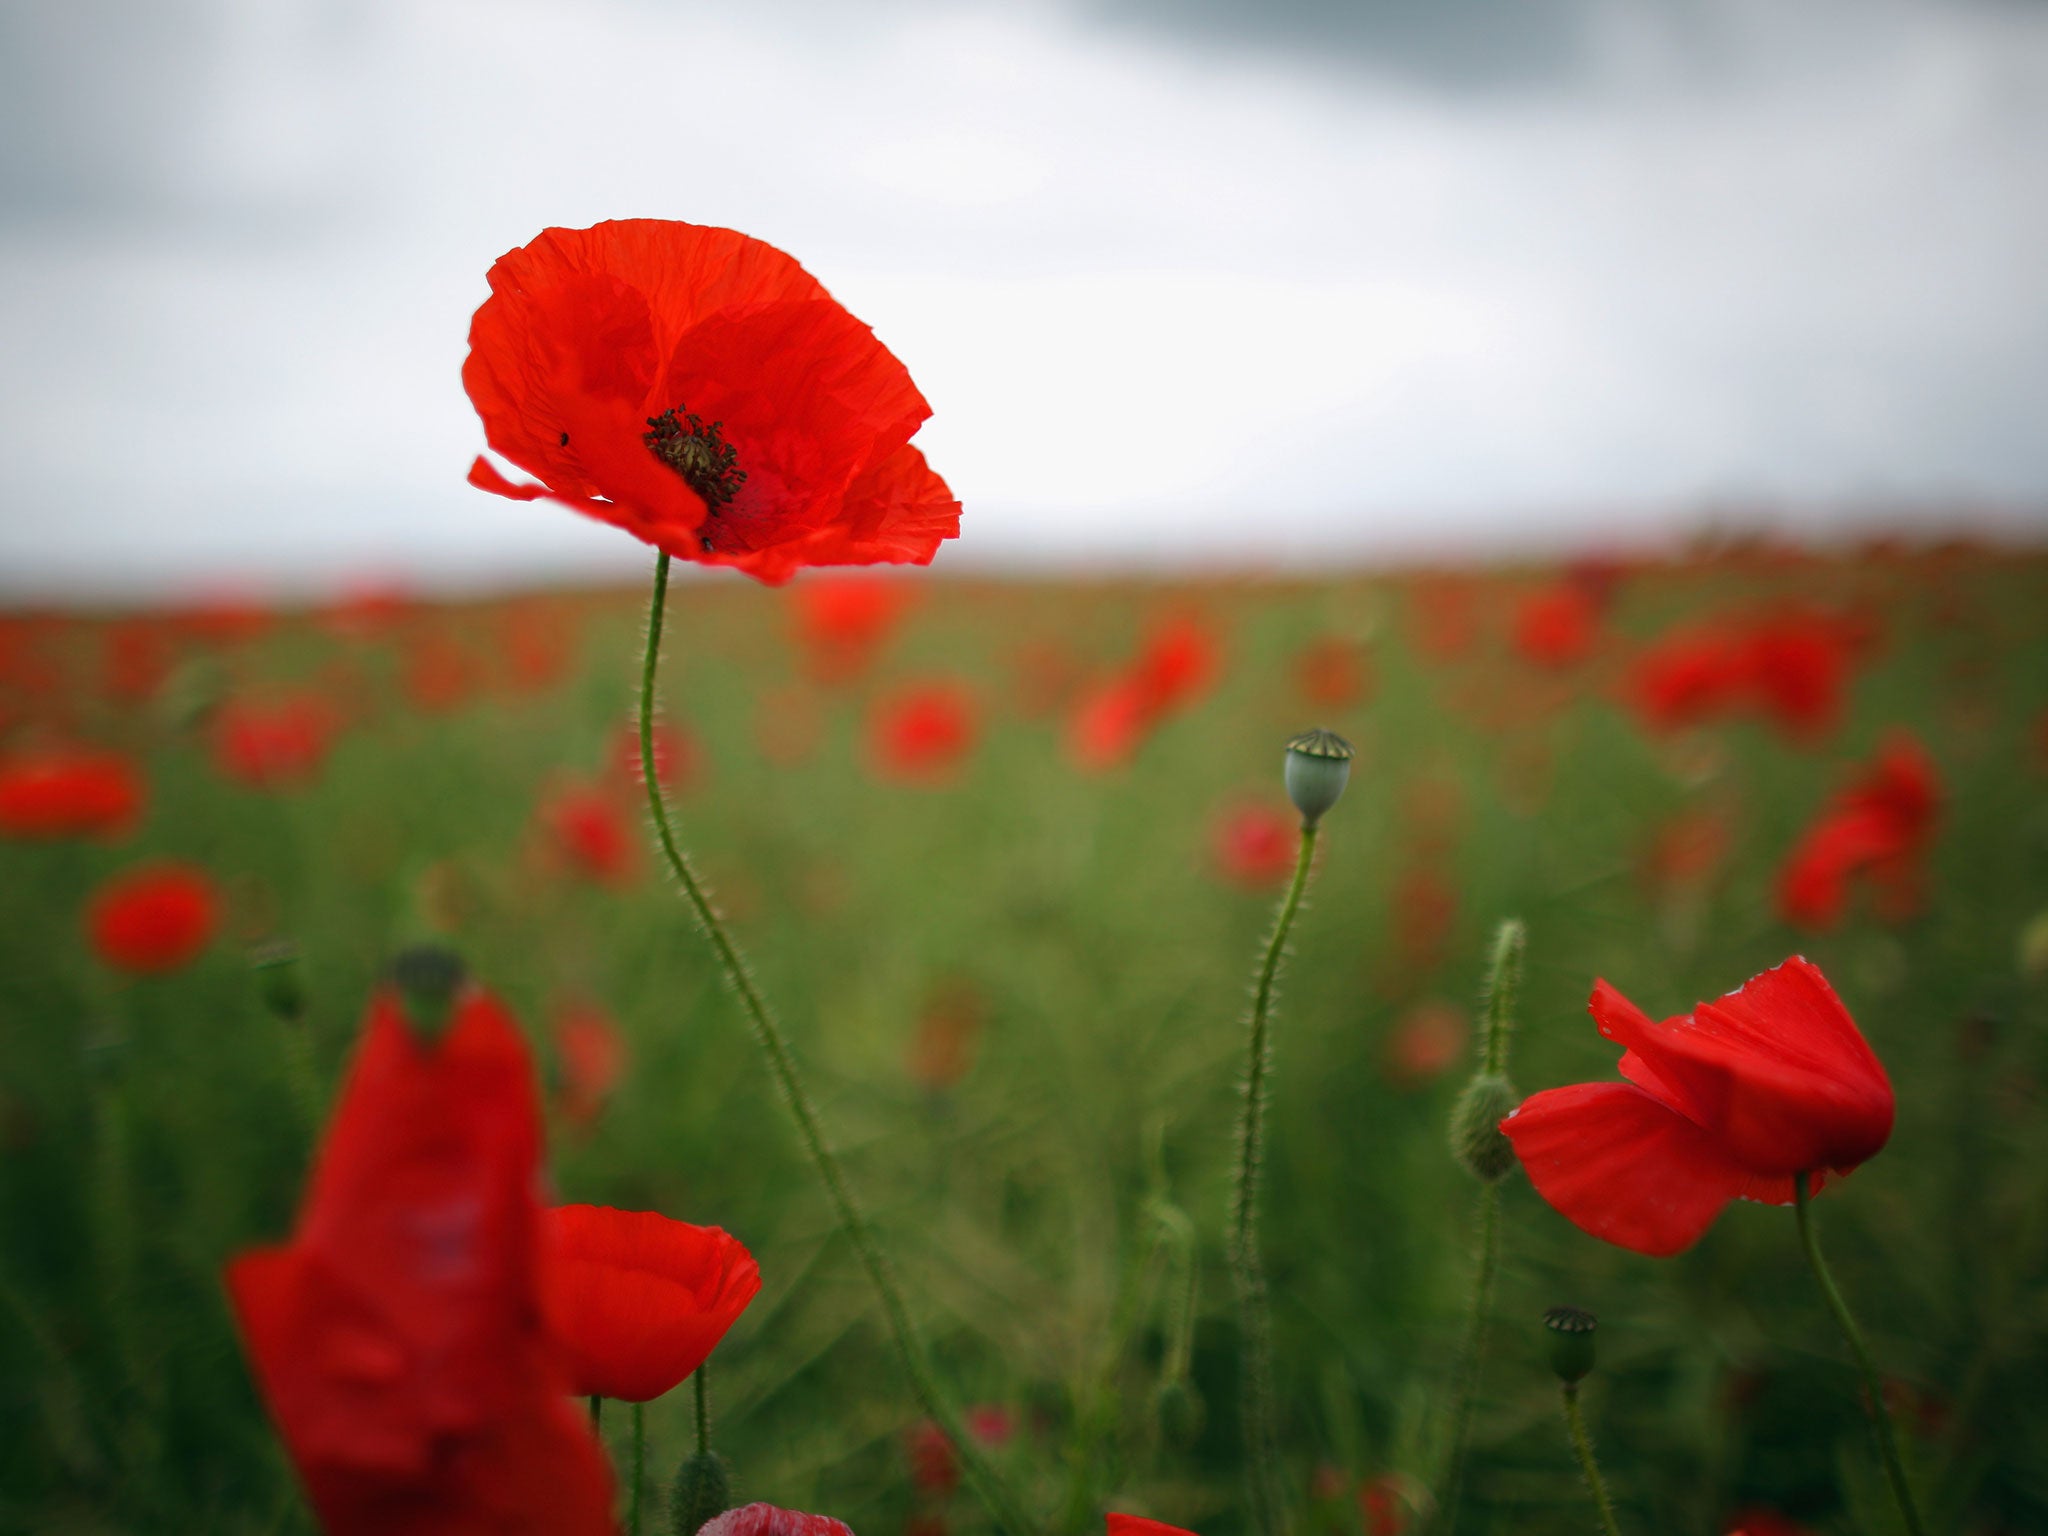 This year marks the centenary of the First World War